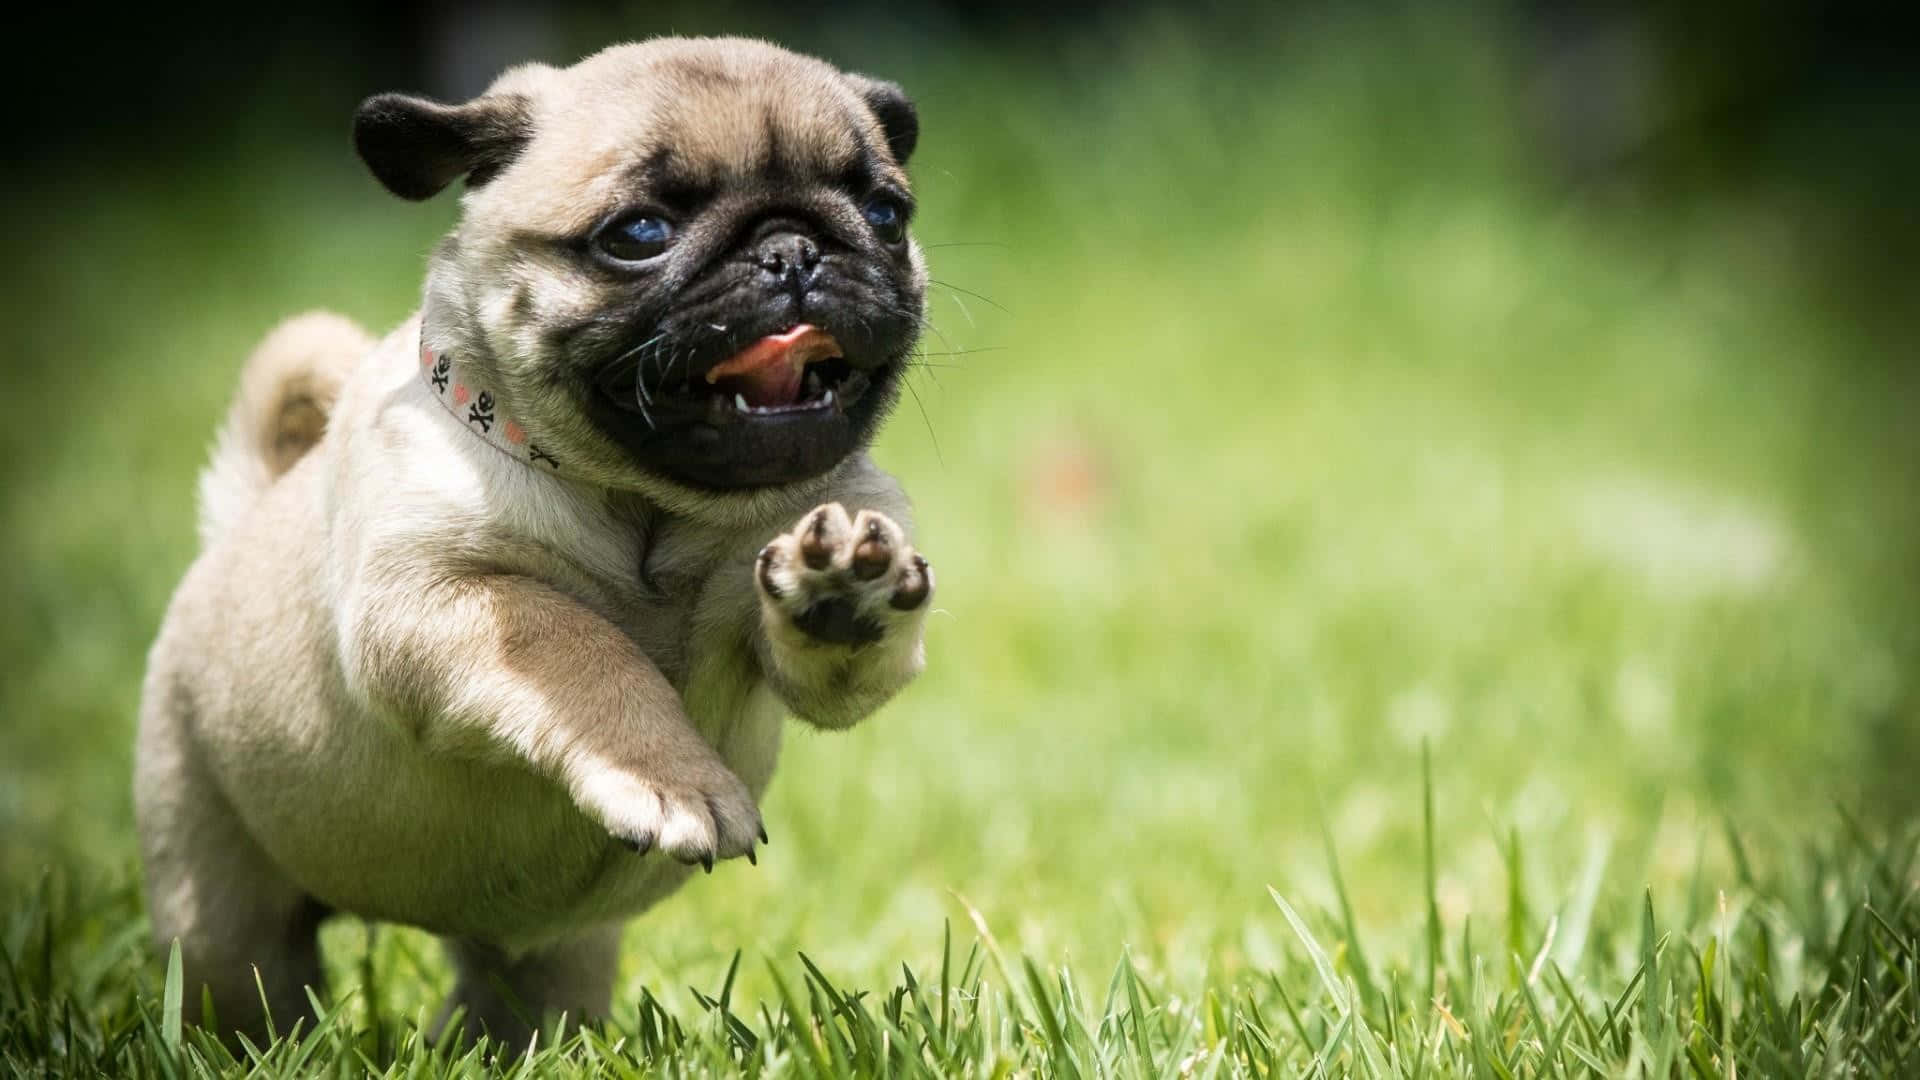 Cute Pug Jumping Picture